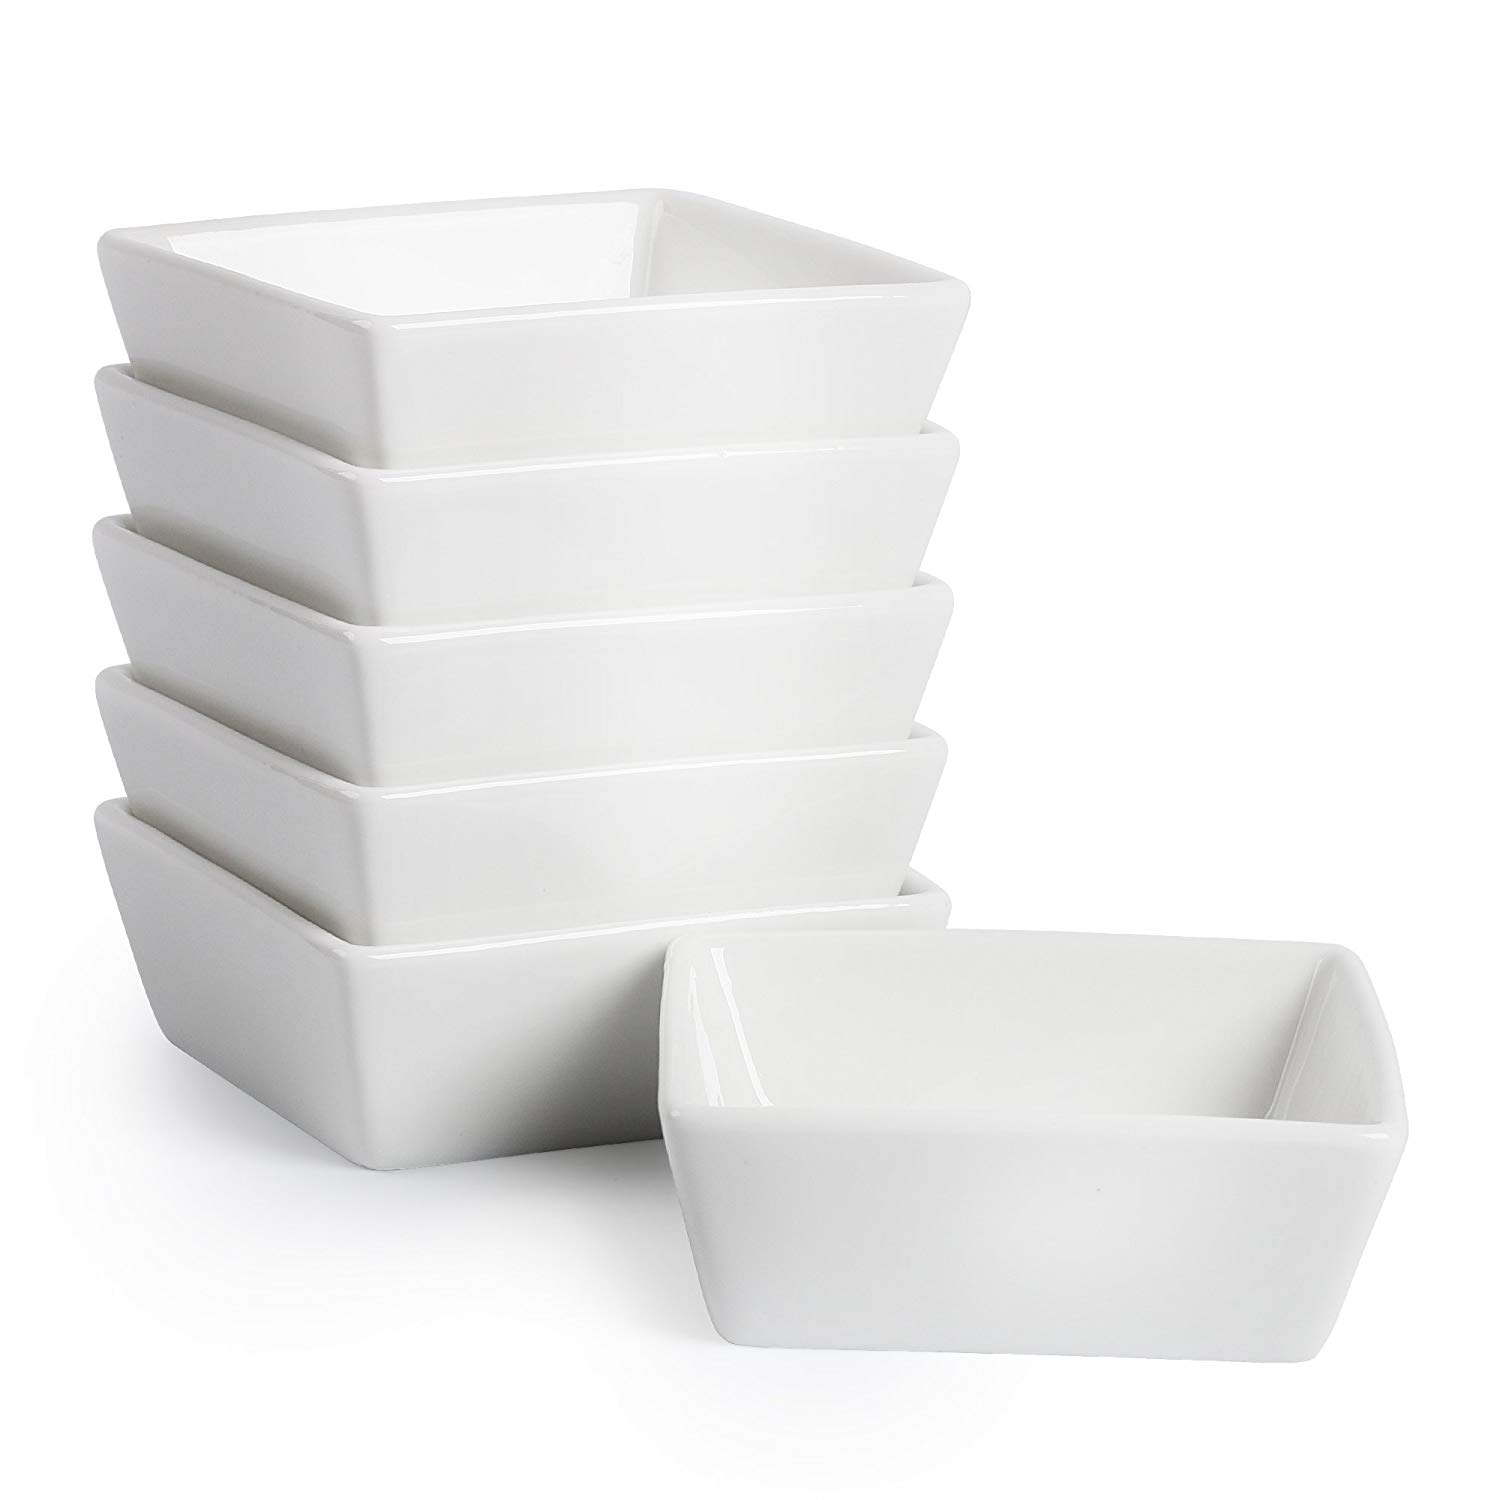 Dessert Ice Cream Bowls Ceramic Ramekins Dipping Cups 6pcs Dish Holders Sauce Dish Plate White Flower Shaped 6PCS Small Porcelain Condiment Dishes with Spoons Snack Appetizer Serving Tray 